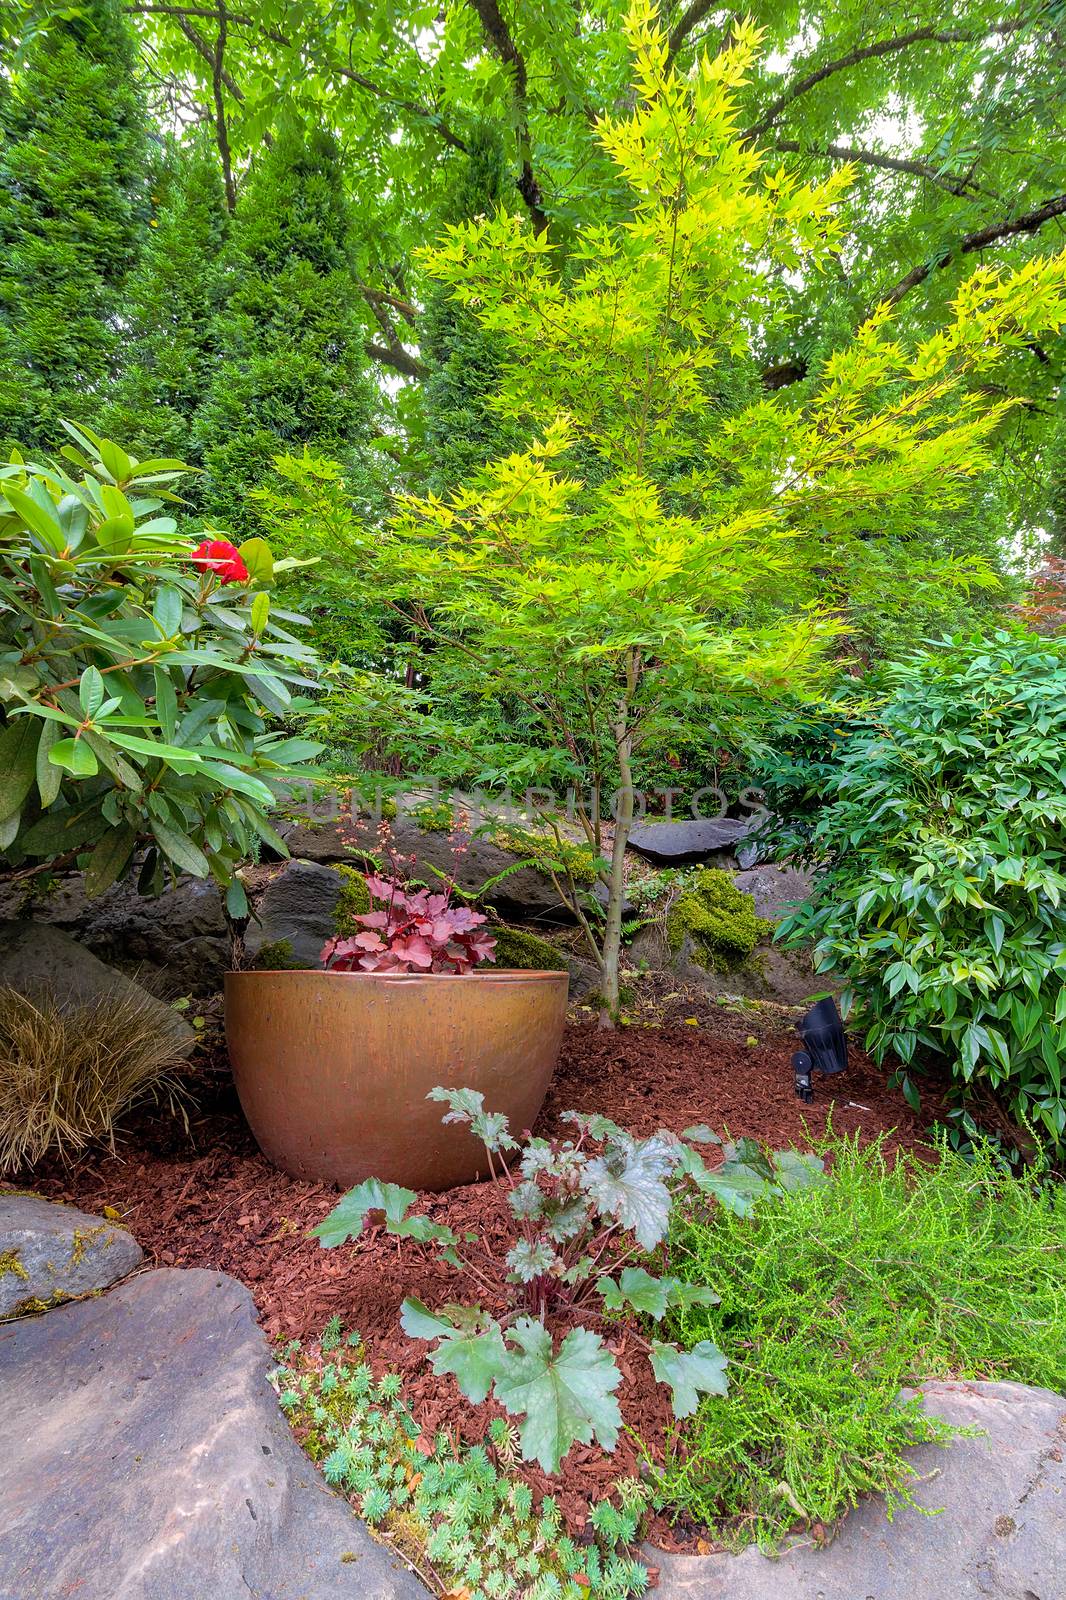 Garden Backyard with gold pot container in landscaped yard with plants shrubs and trees